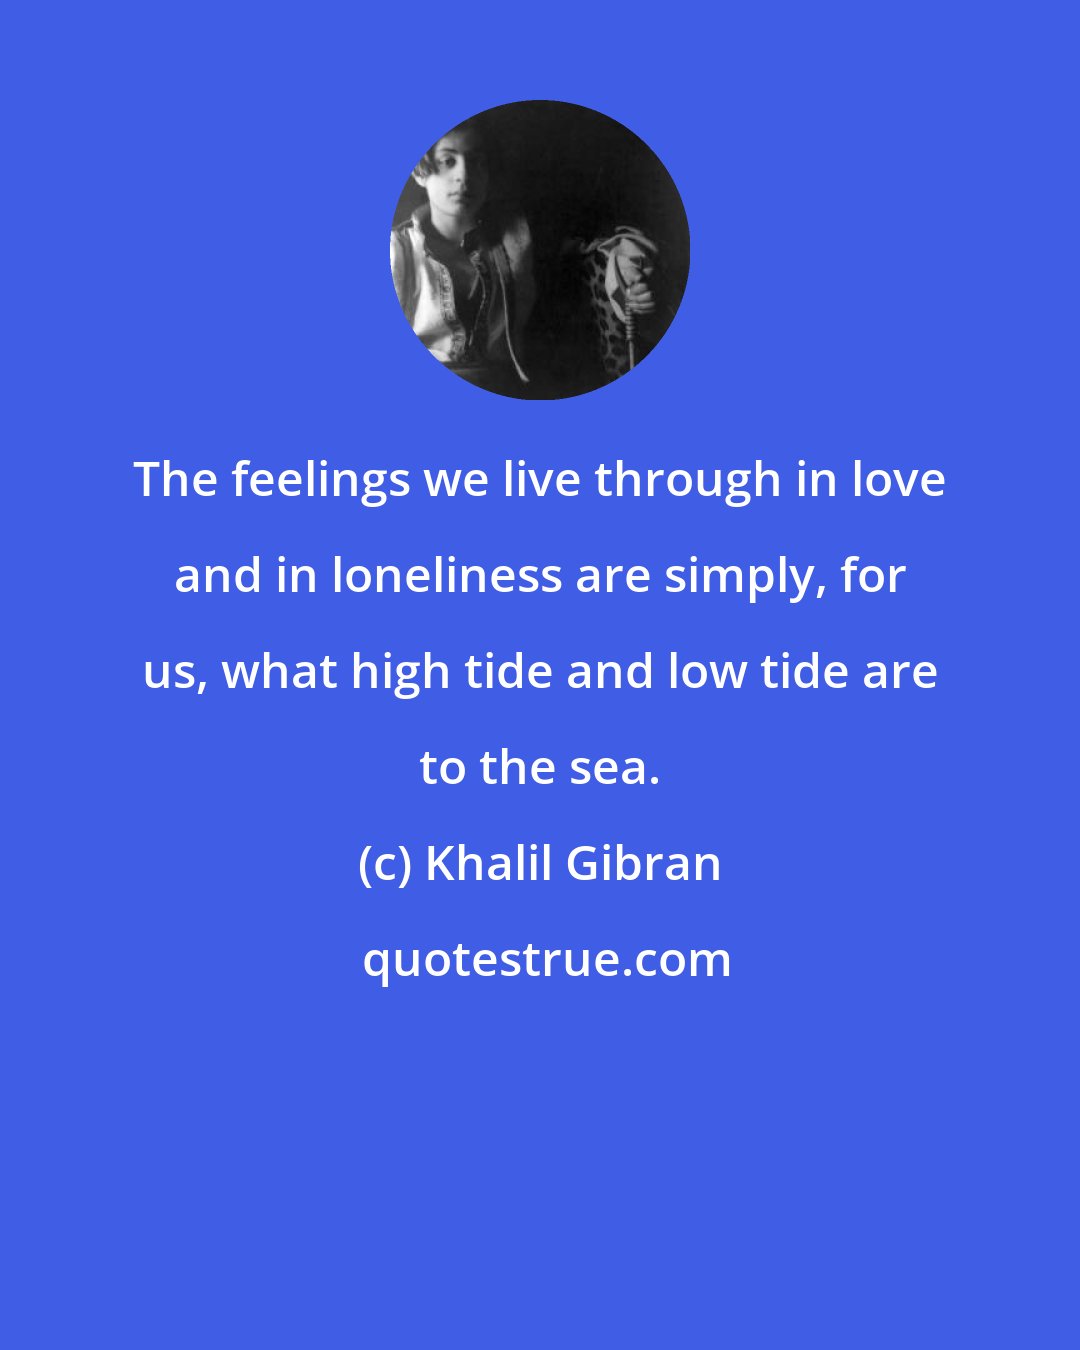 Khalil Gibran: The feelings we live through in love and in loneliness are simply, for us, what high tide and low tide are to the sea.